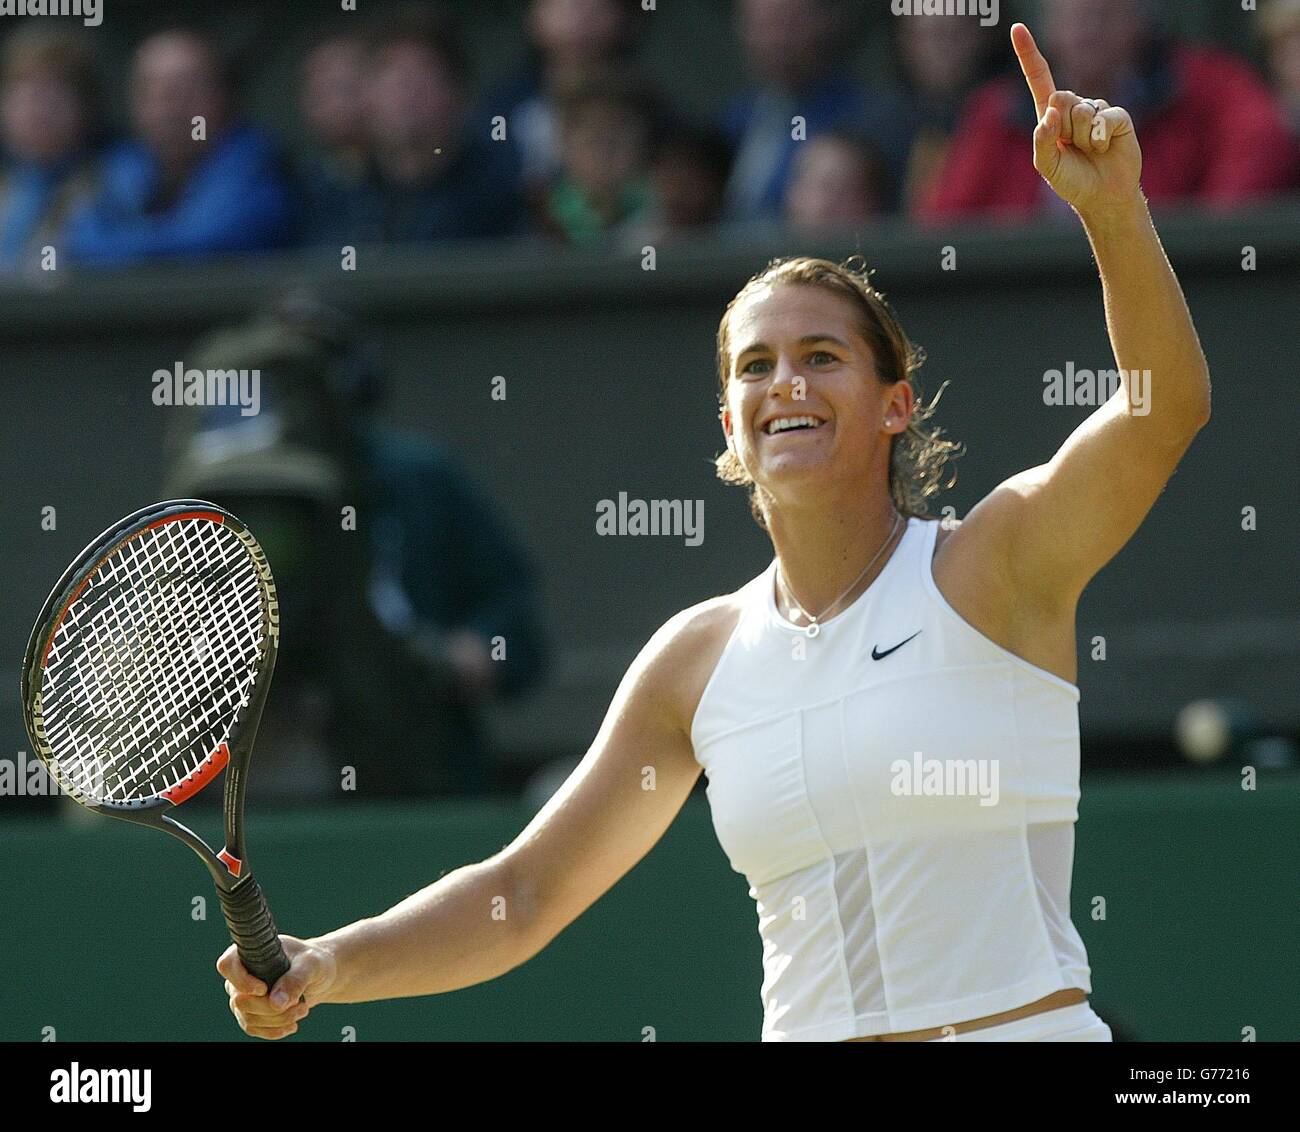 , NO COMMERCIAL USE. Amelie Mauresmo of France, the 9th seed celebrates beating Jennifer Capriati, the 3rd seed from the USA on Centre Court at Wimbledon. Final score 6:3/6:2. Stock Photo